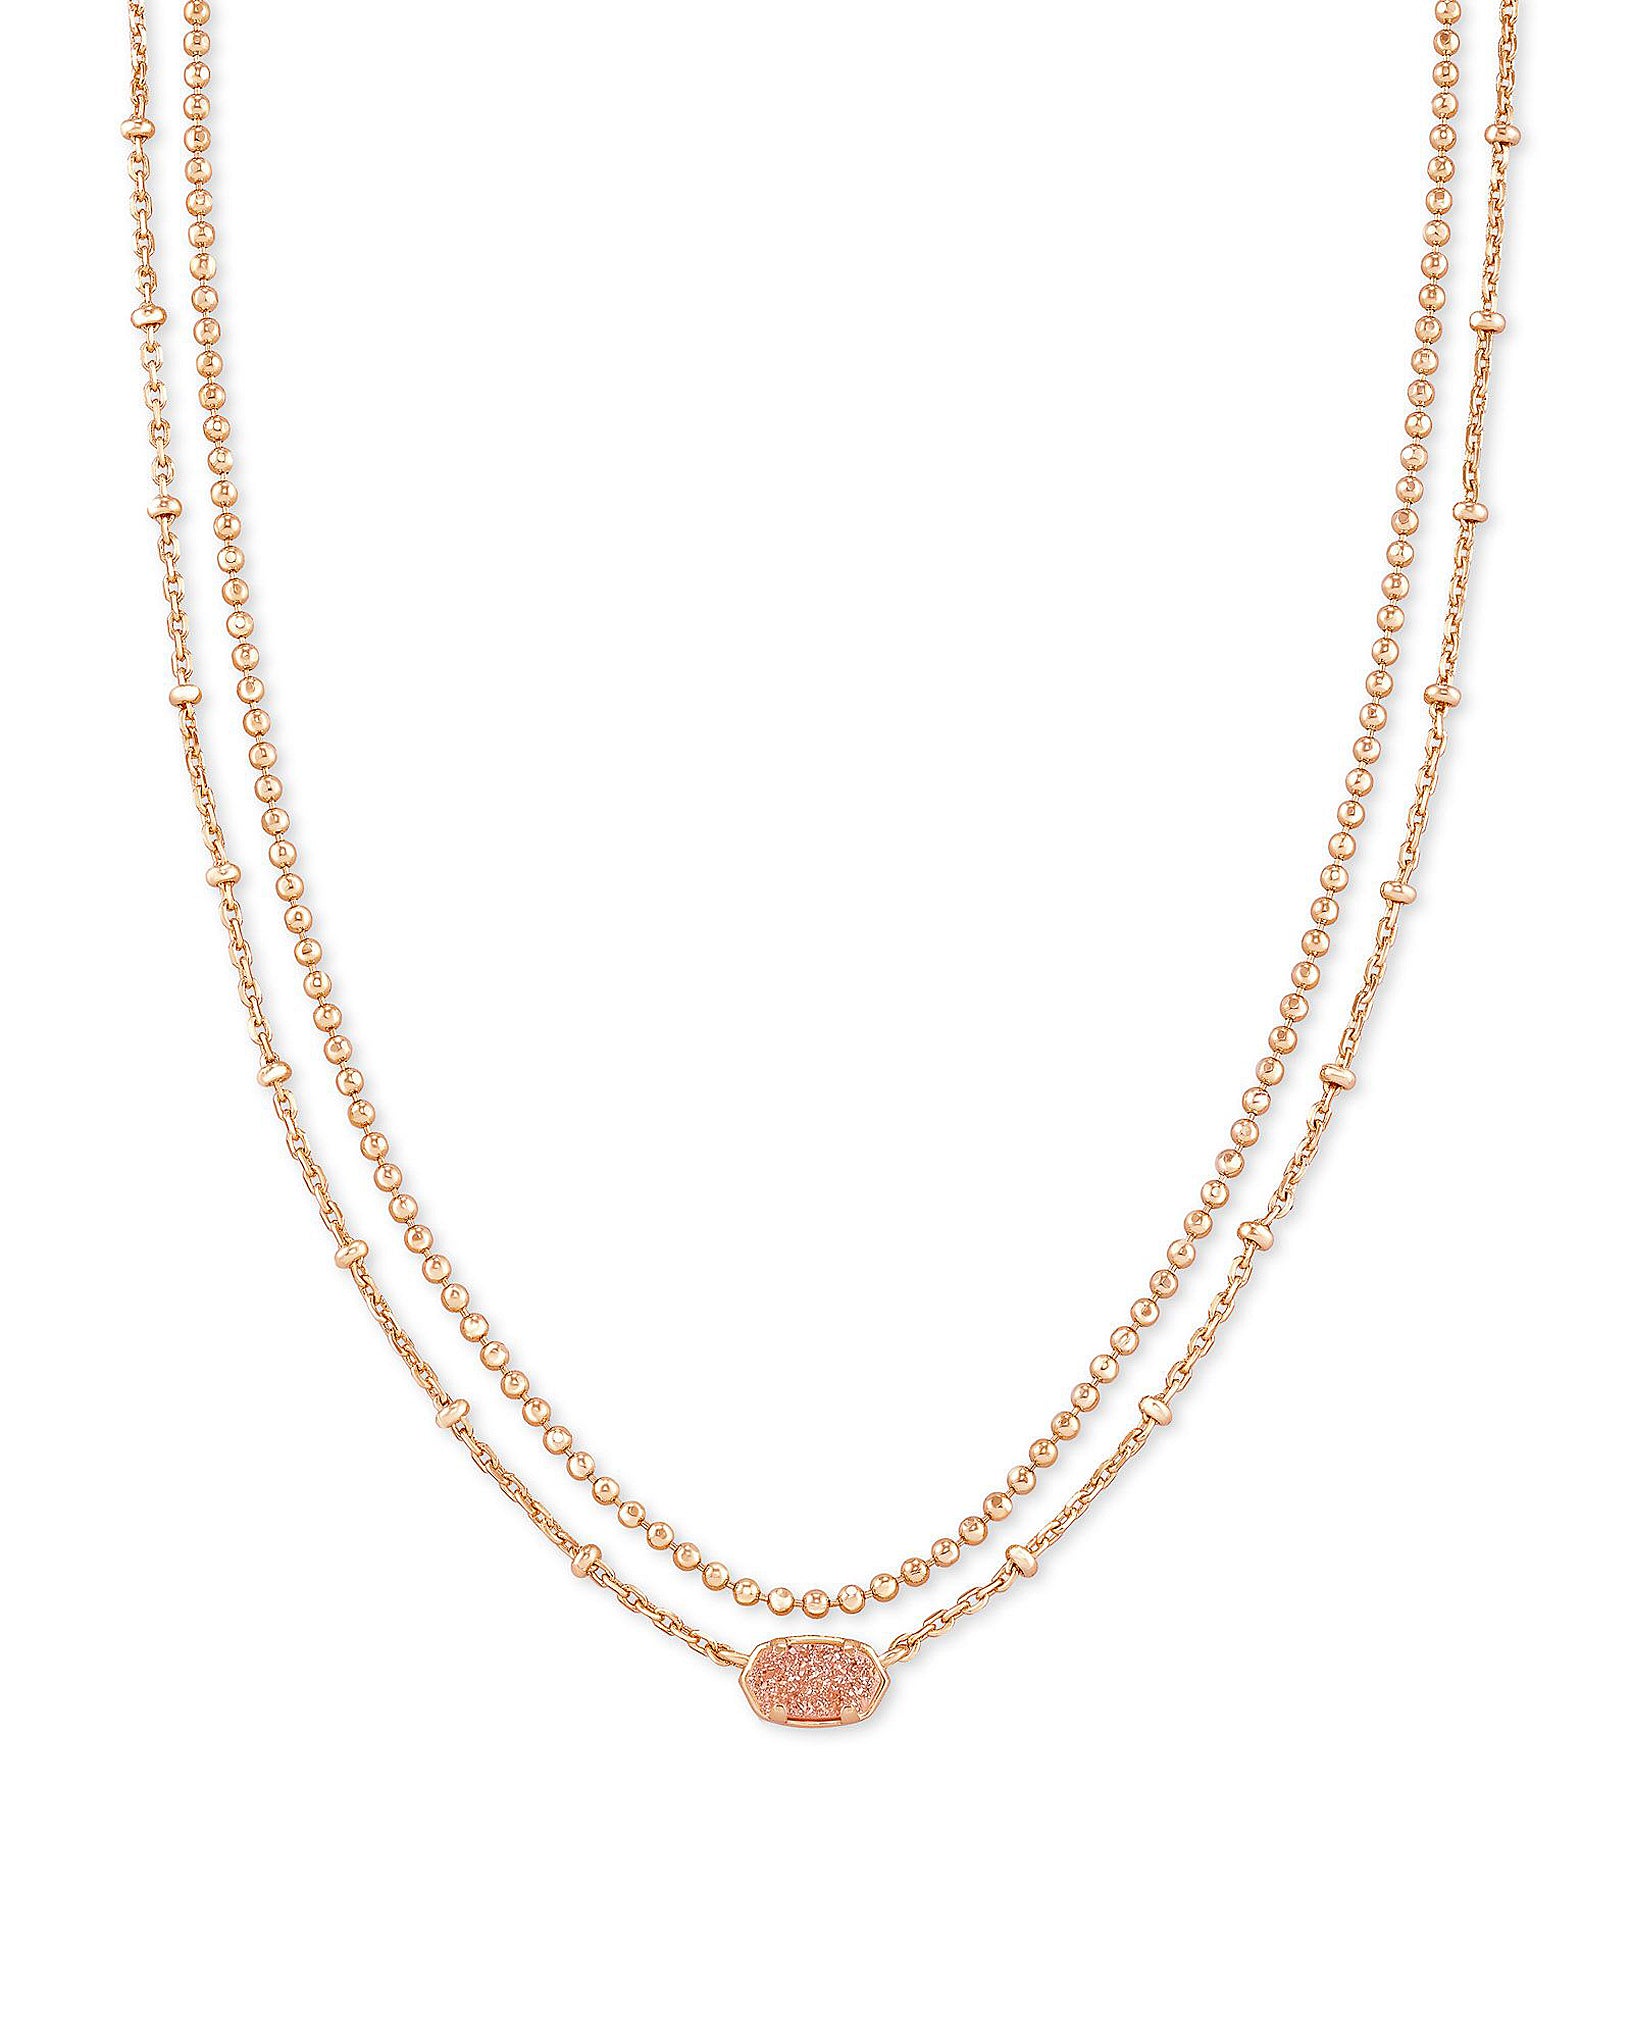 Kendra Scott Emilie Oval Multi Strand Necklace in Sand Drusy and Rose Gold